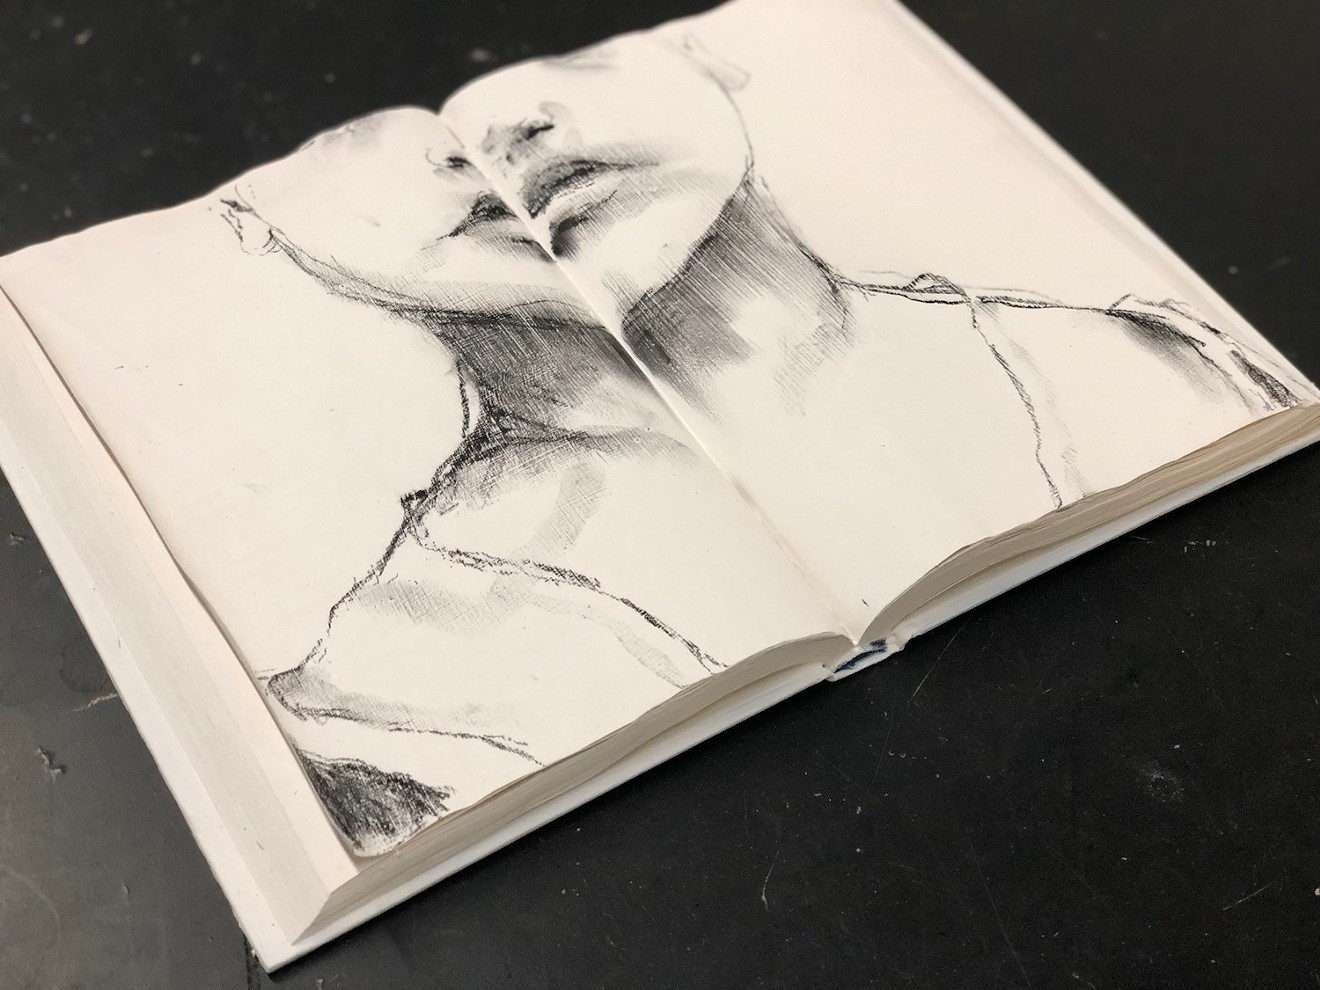 Michael Dowling's experiments with drawings on books go on display Saturday in the Project Space at K Contemporary.